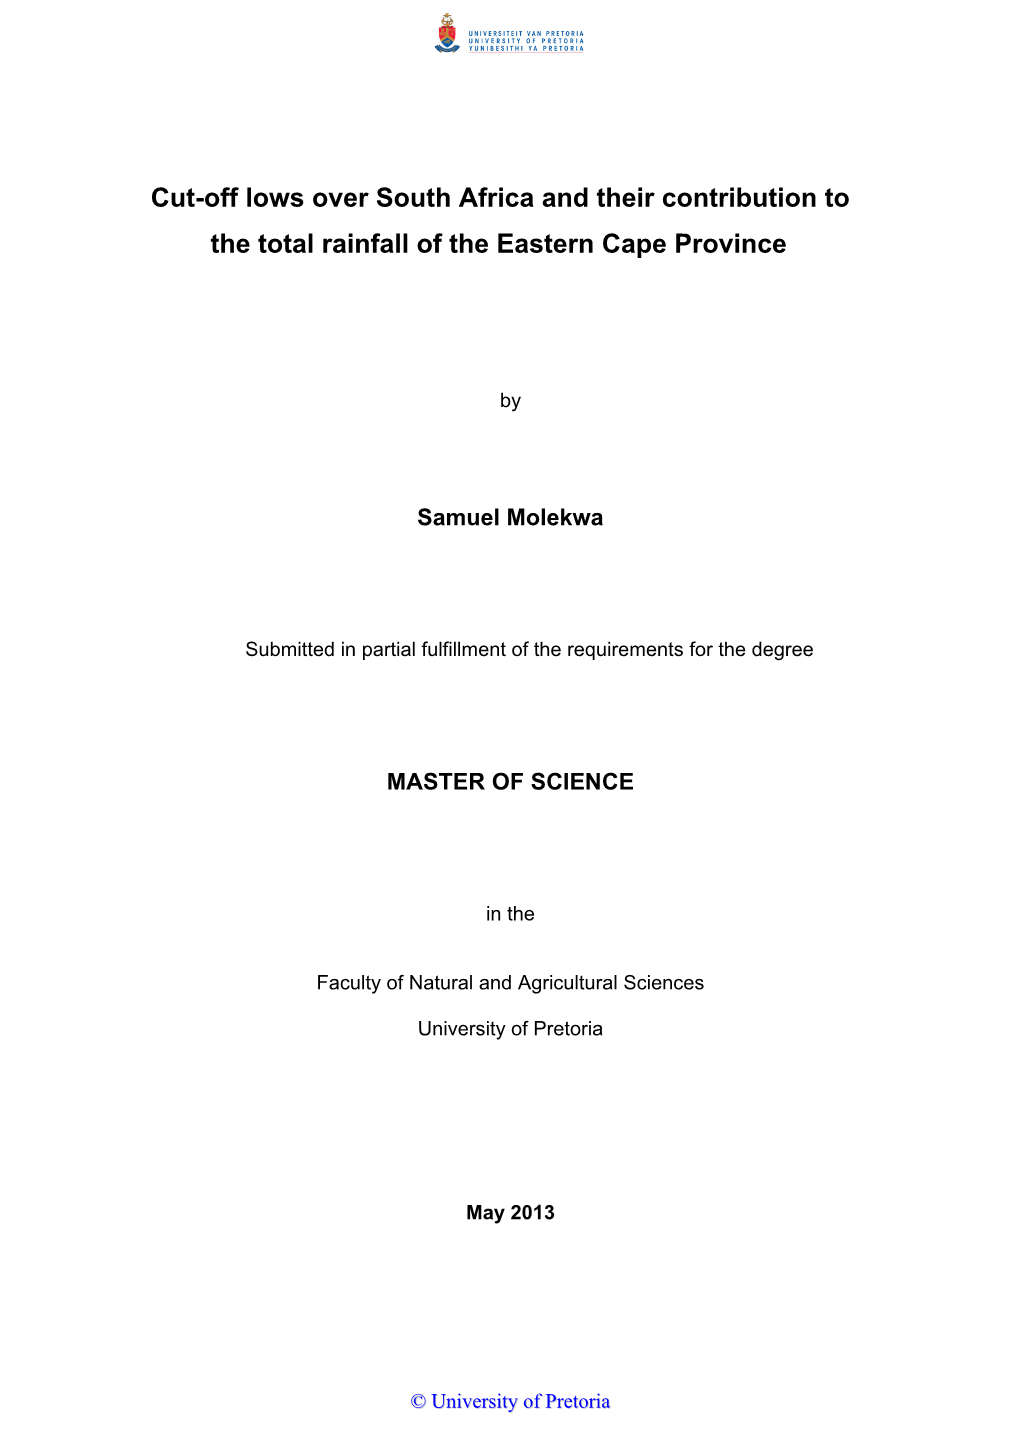 Cut-Off Lows Over South Africa and Their Contribution to the Total Rainfall of the Eastern Cape Province